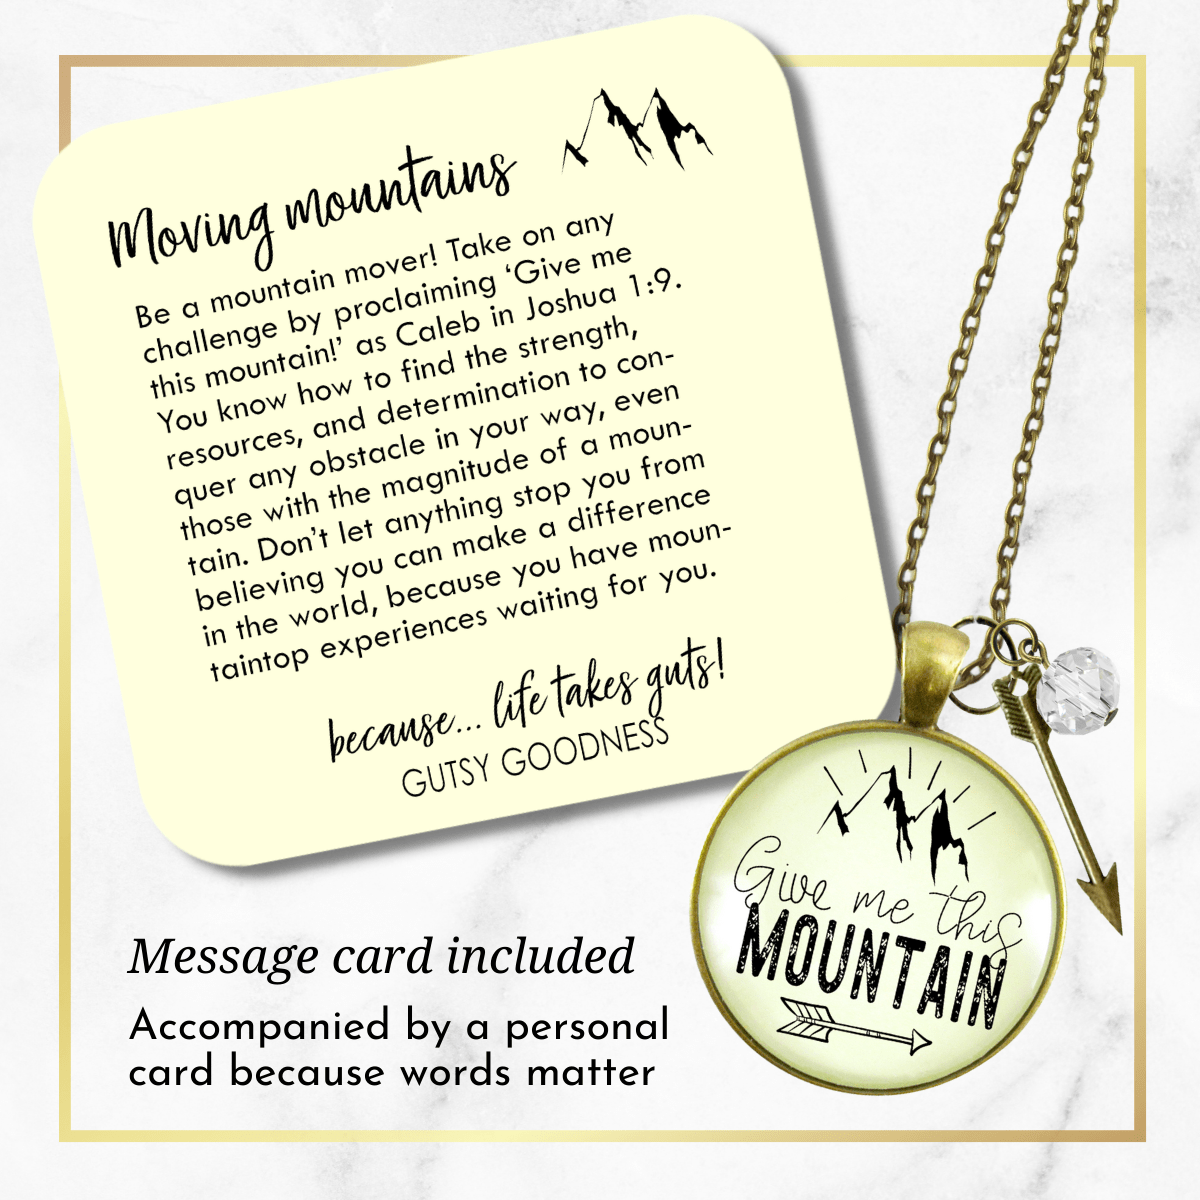 Gutsy Goodness Give Me This Mountain Motivational Necklace Pendant Mantra Quote Arrow Charm - Gutsy Goodness Handmade Jewelry;Give Me This Mountain Motivational Necklace Pendant Mantra Quote Arrow Charm - Gutsy Goodness Handmade Jewelry Gifts